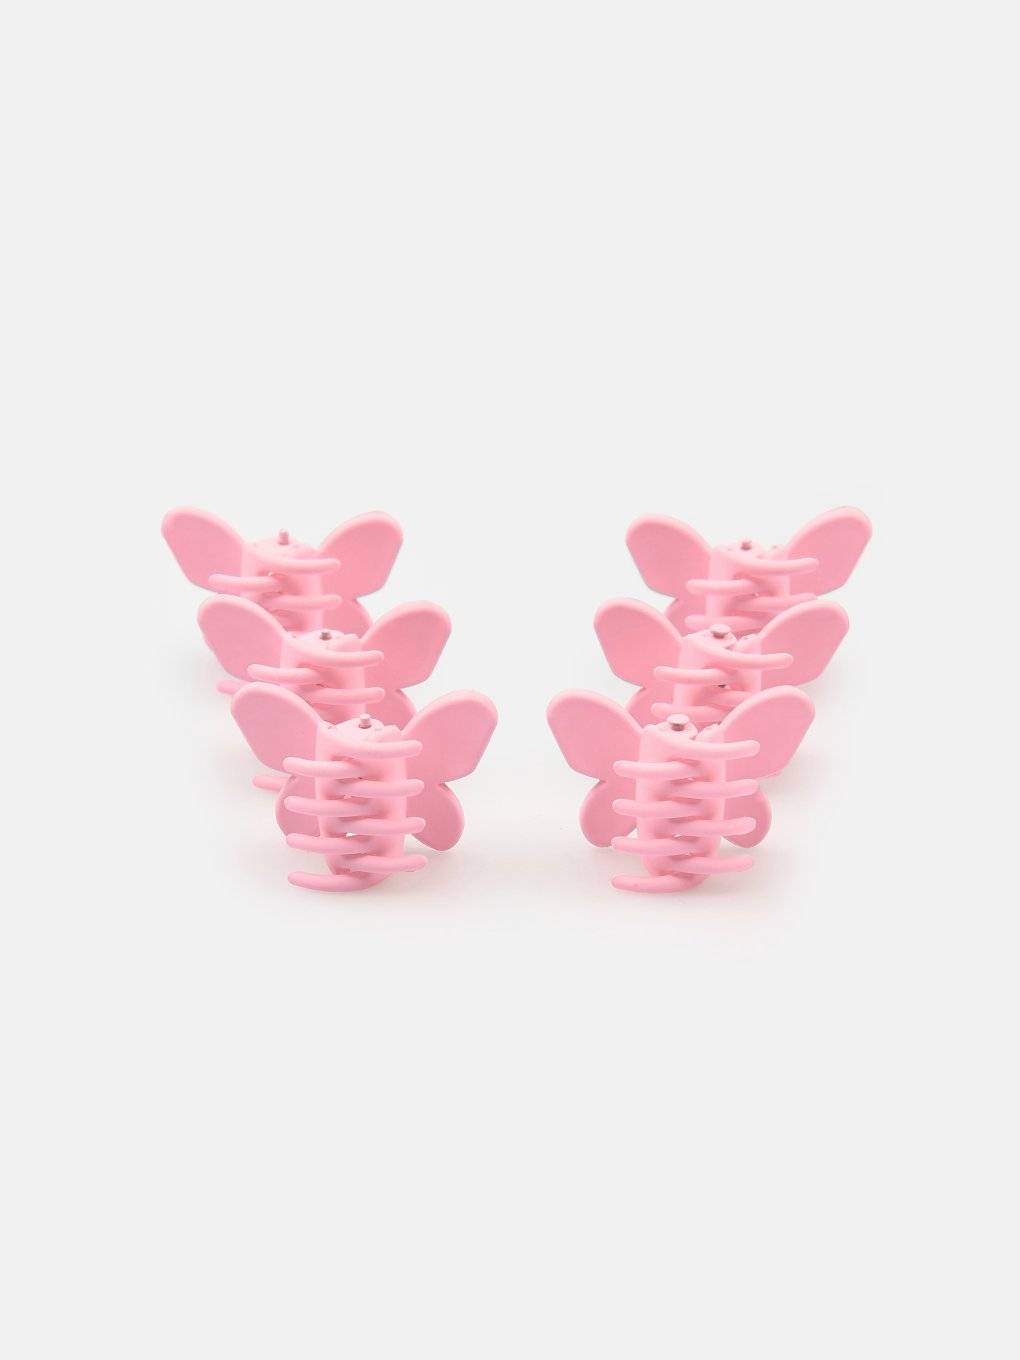 Set of 6 hairclips in butterfly design